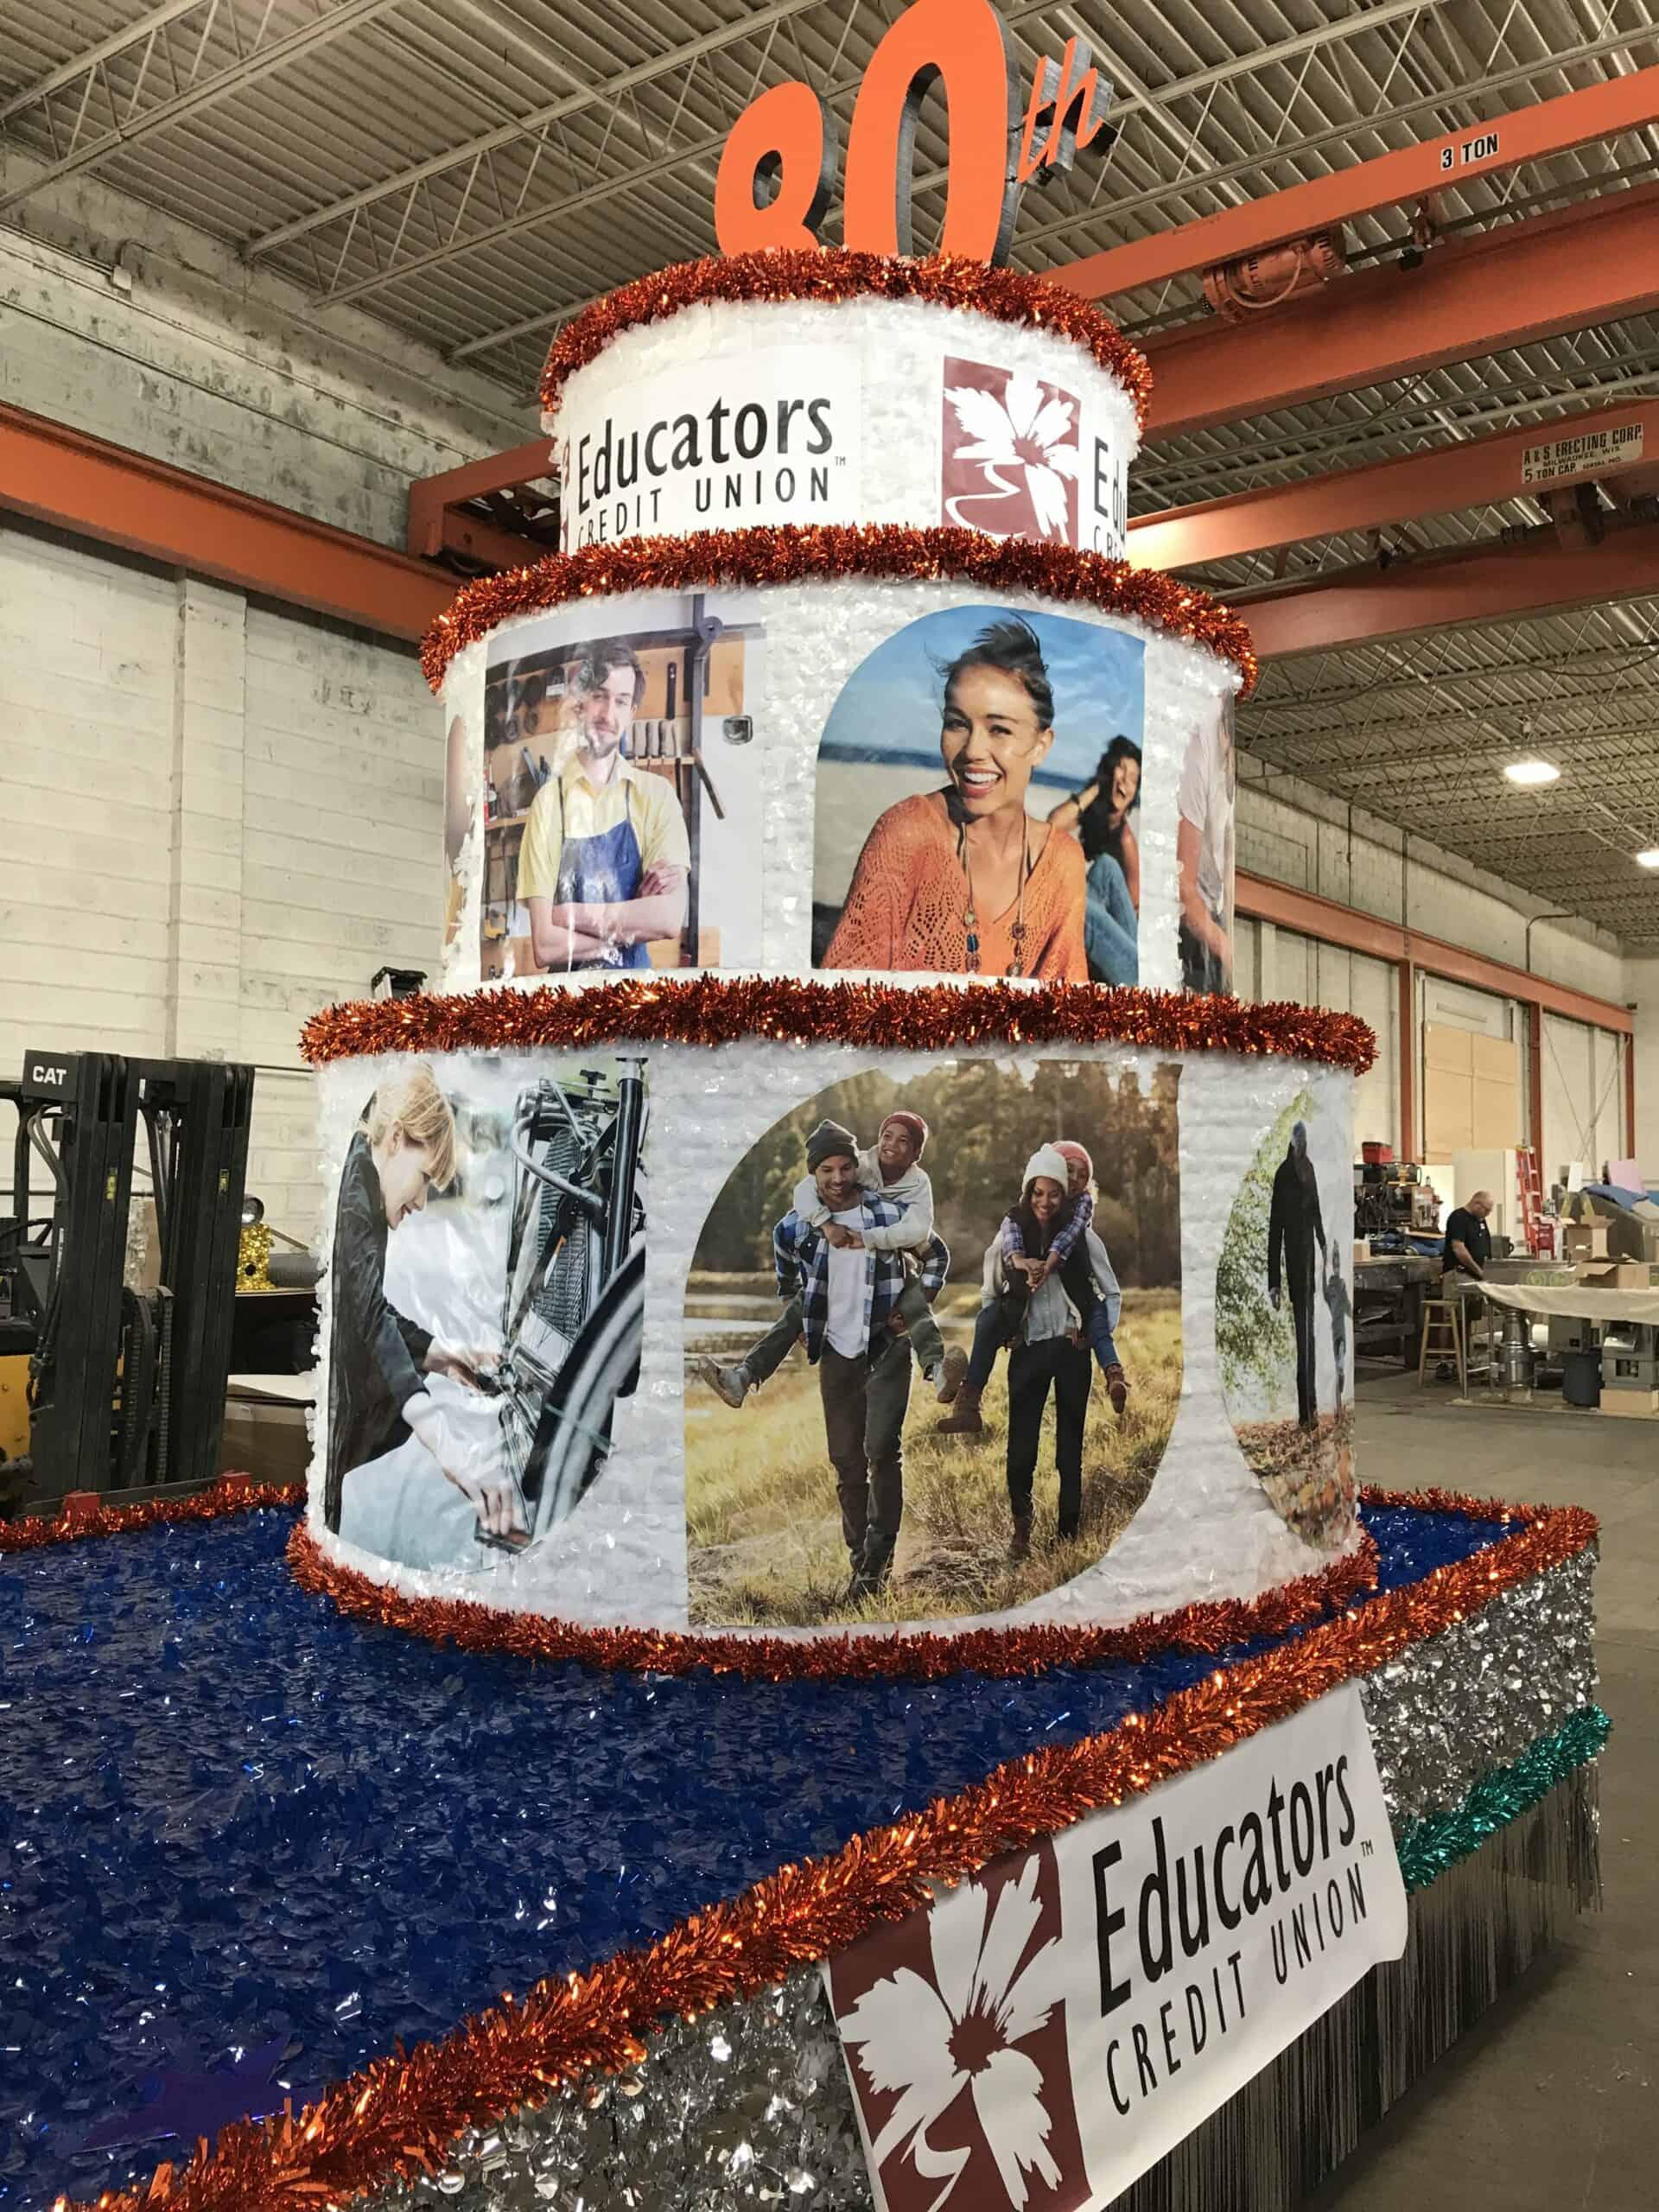 Photo of the Educator's float that was in the 4th of July parade in Racine